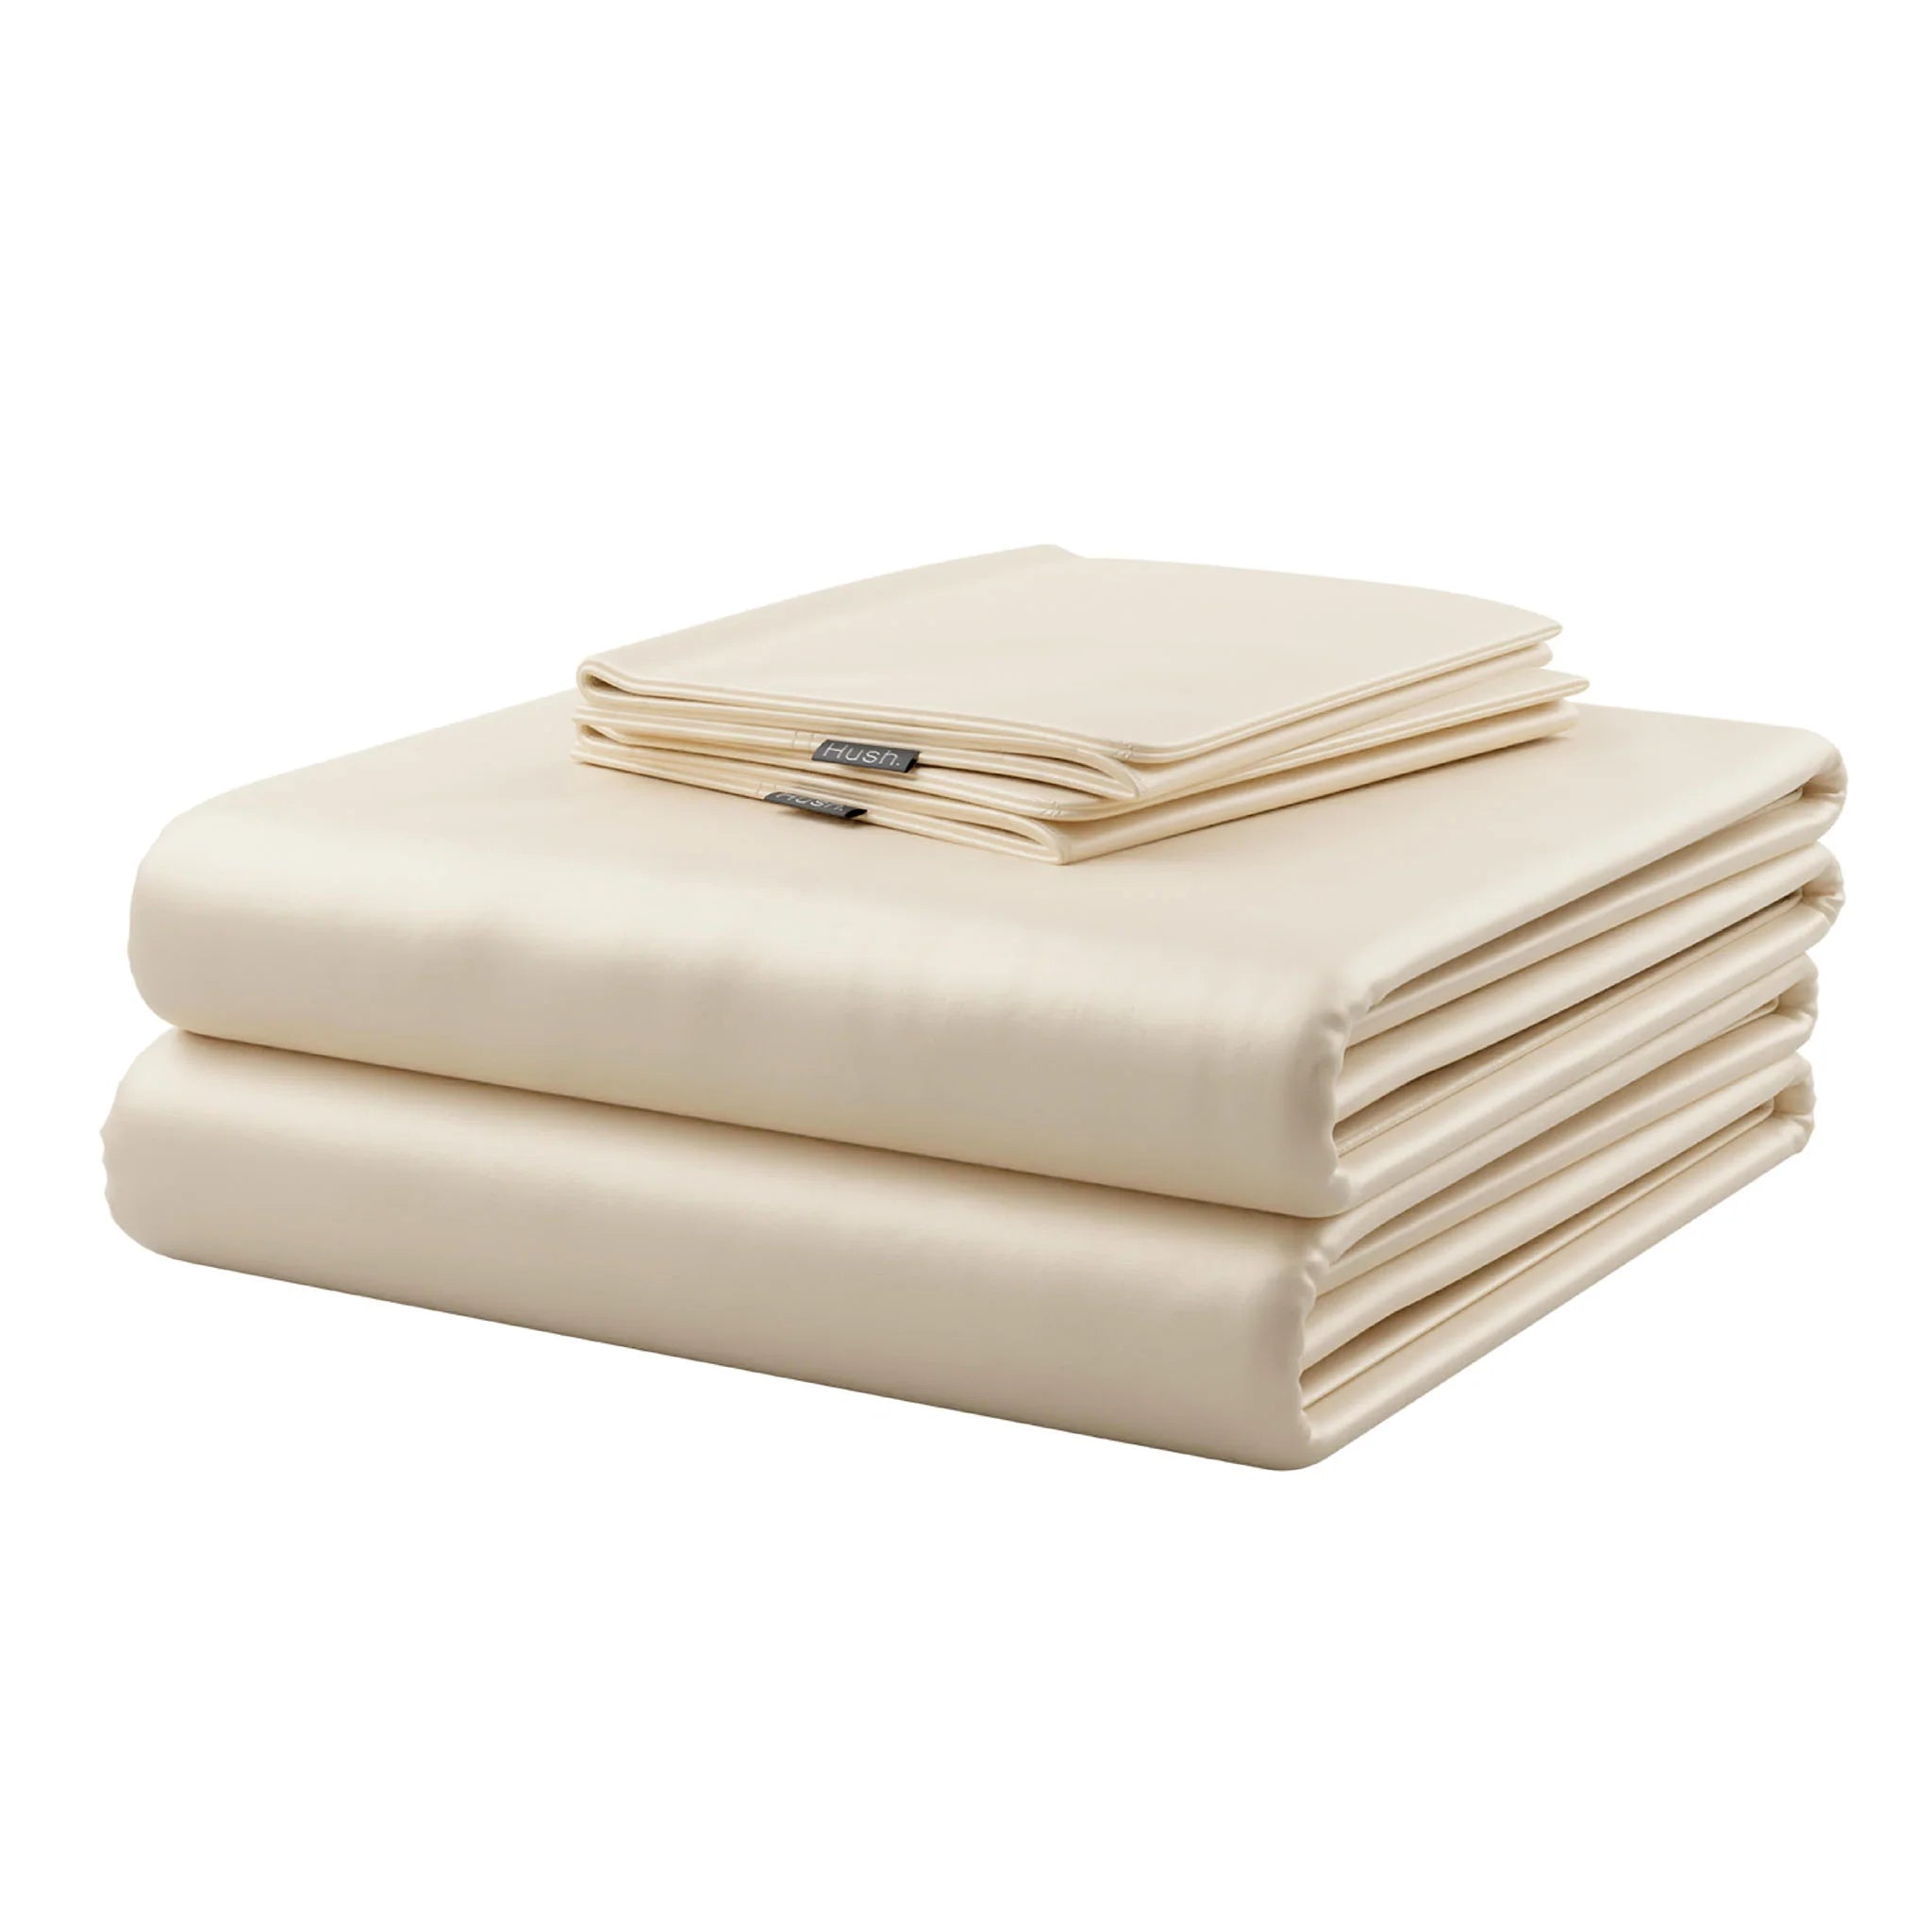 Hush Blankets Bedding Package Iced Latte / Twin Hush Iced 2.0 Cooling Organic Bamboo Bed Sheet and Pillowcase Bedding Package - Available in 8 Colours and 5 Sizes